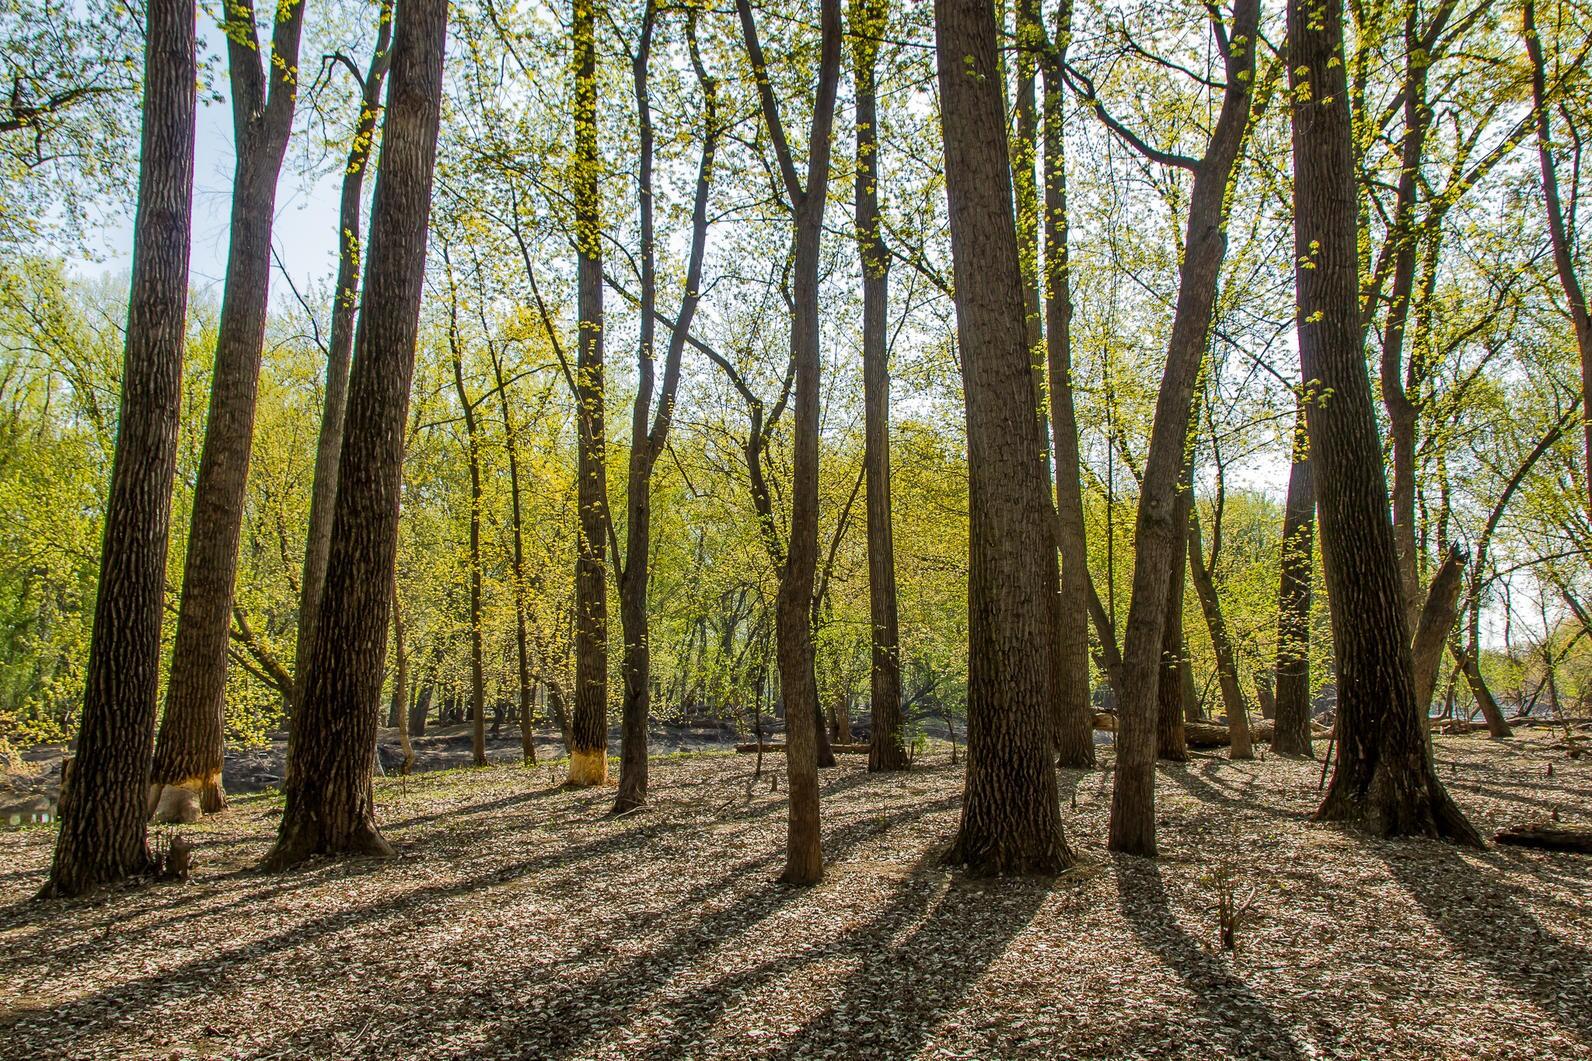 A stand of Cottonwoods in a floodplain forest, bathed in sunlight.